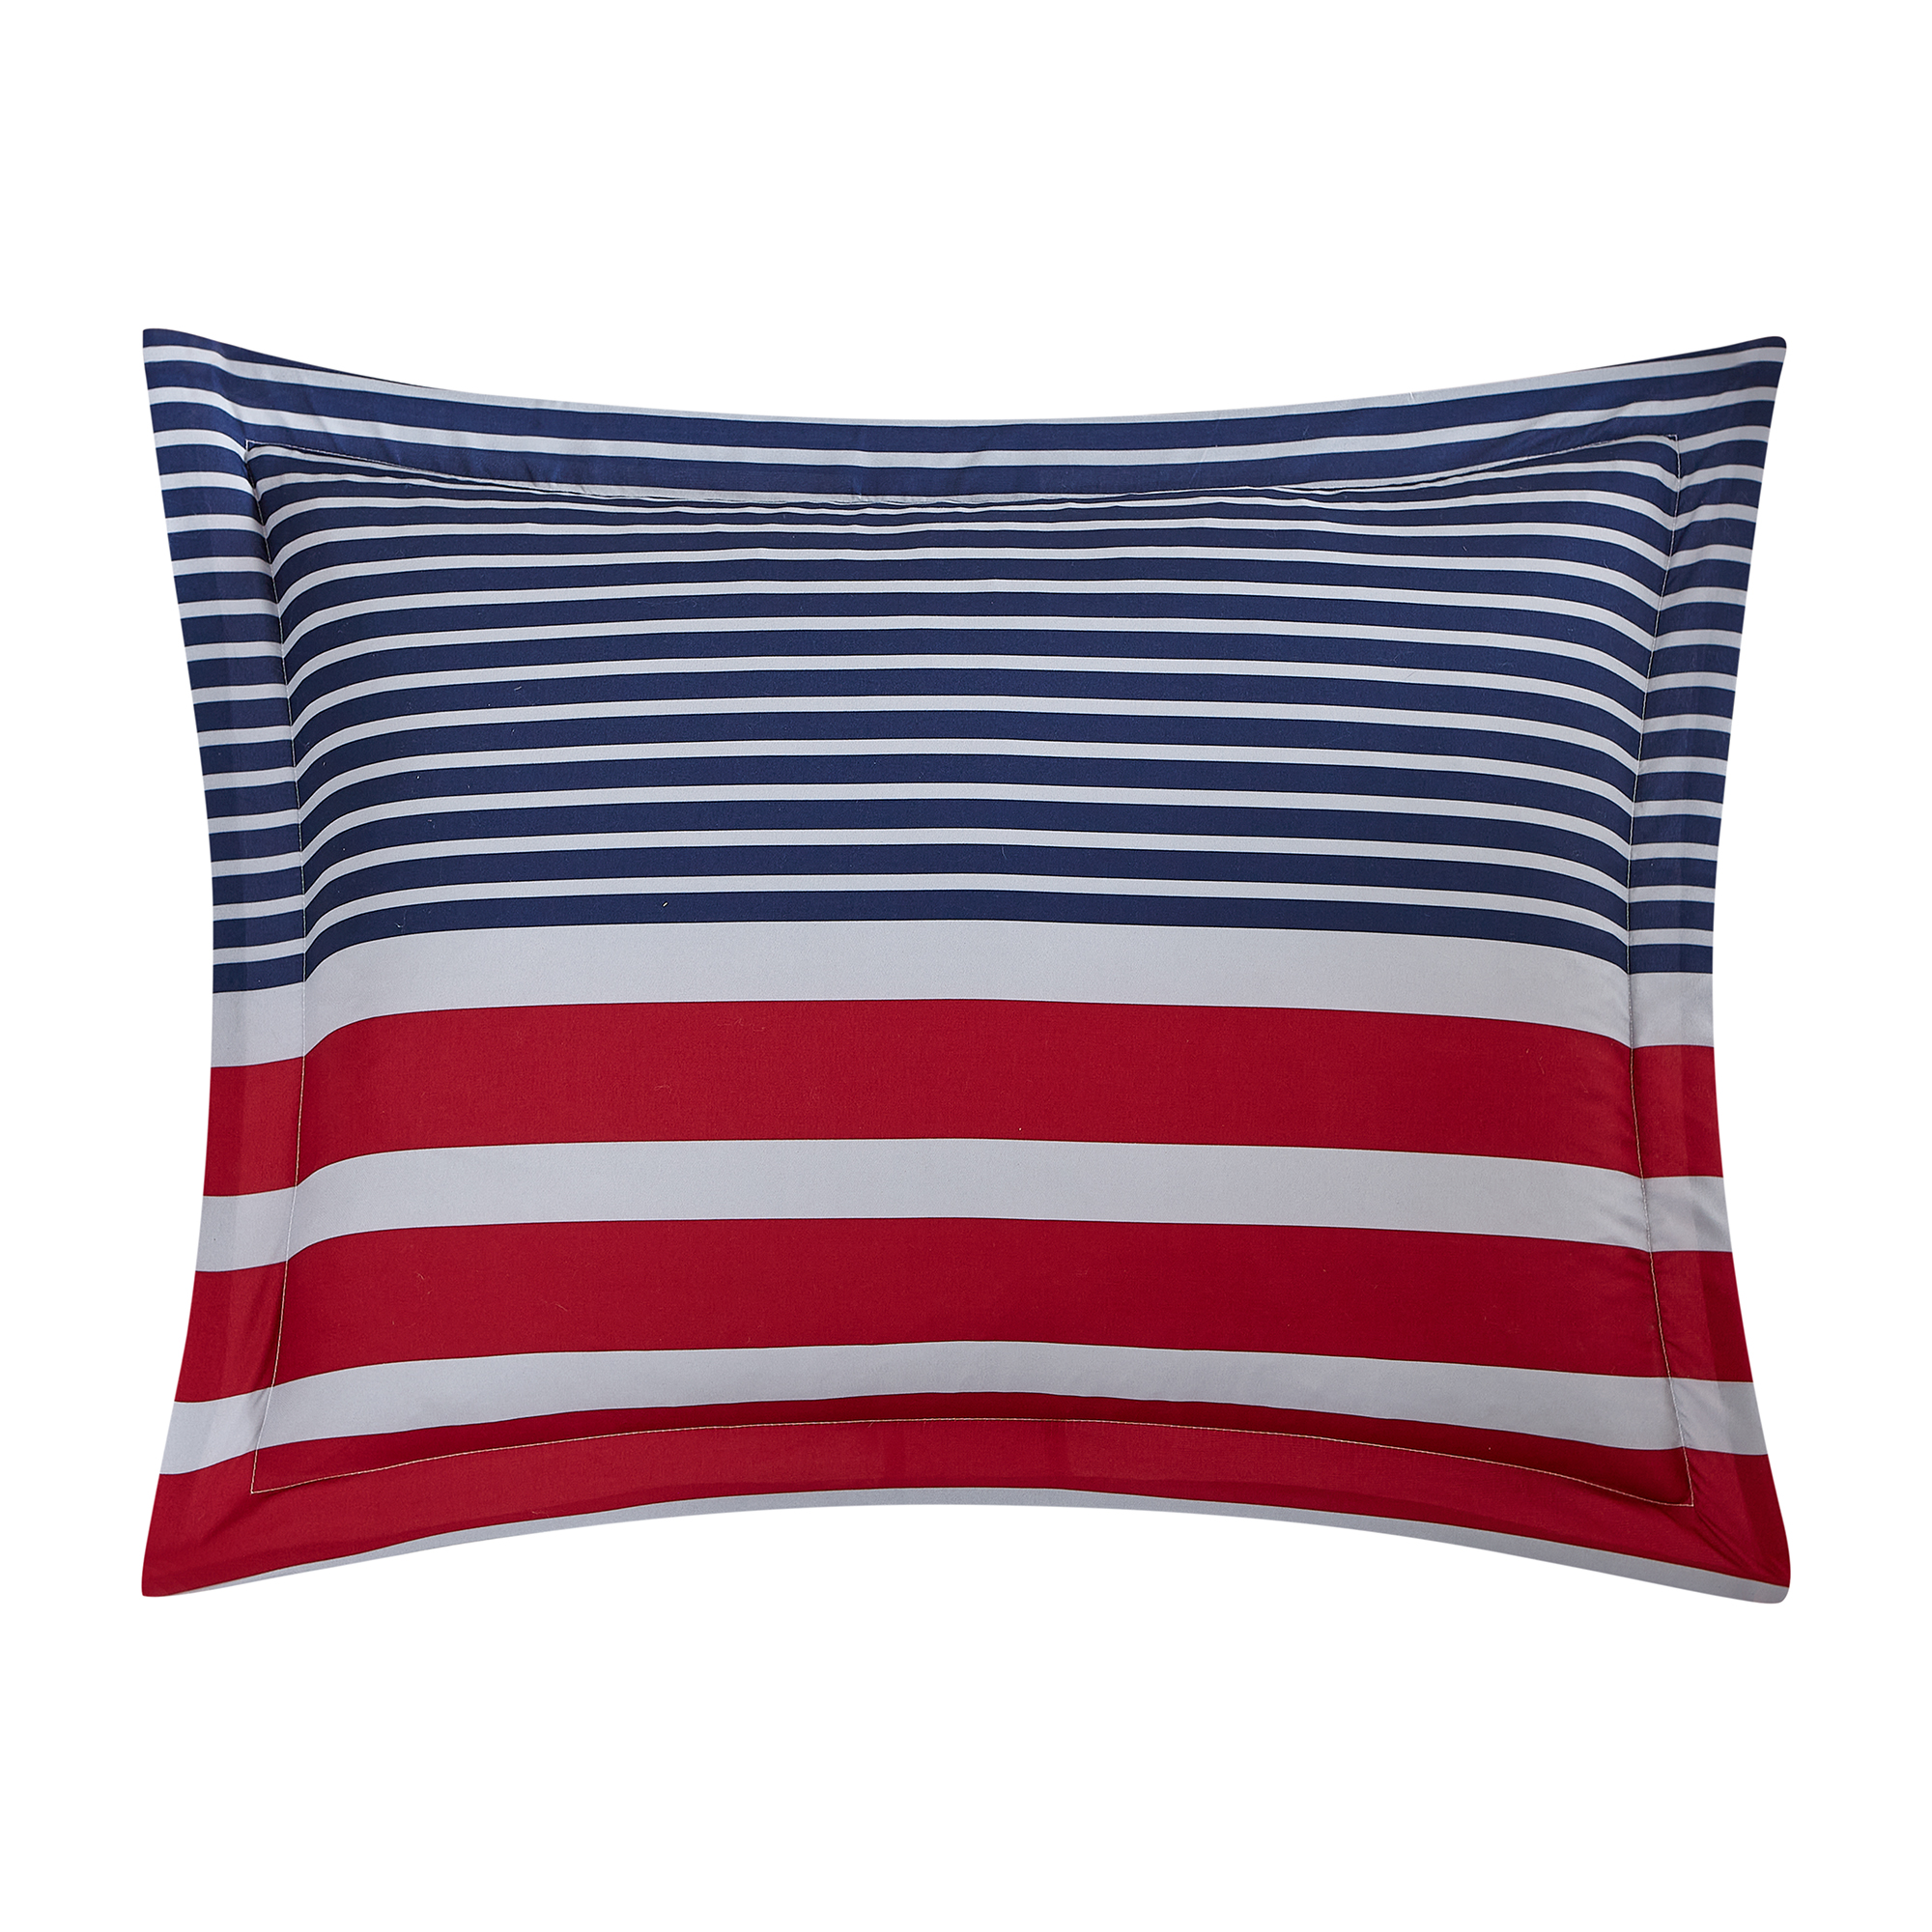 Mainstays Red and Blue Stripe 6 Piece Bed in a Bag Comforter Set with Sheets, Twin - image 5 of 9